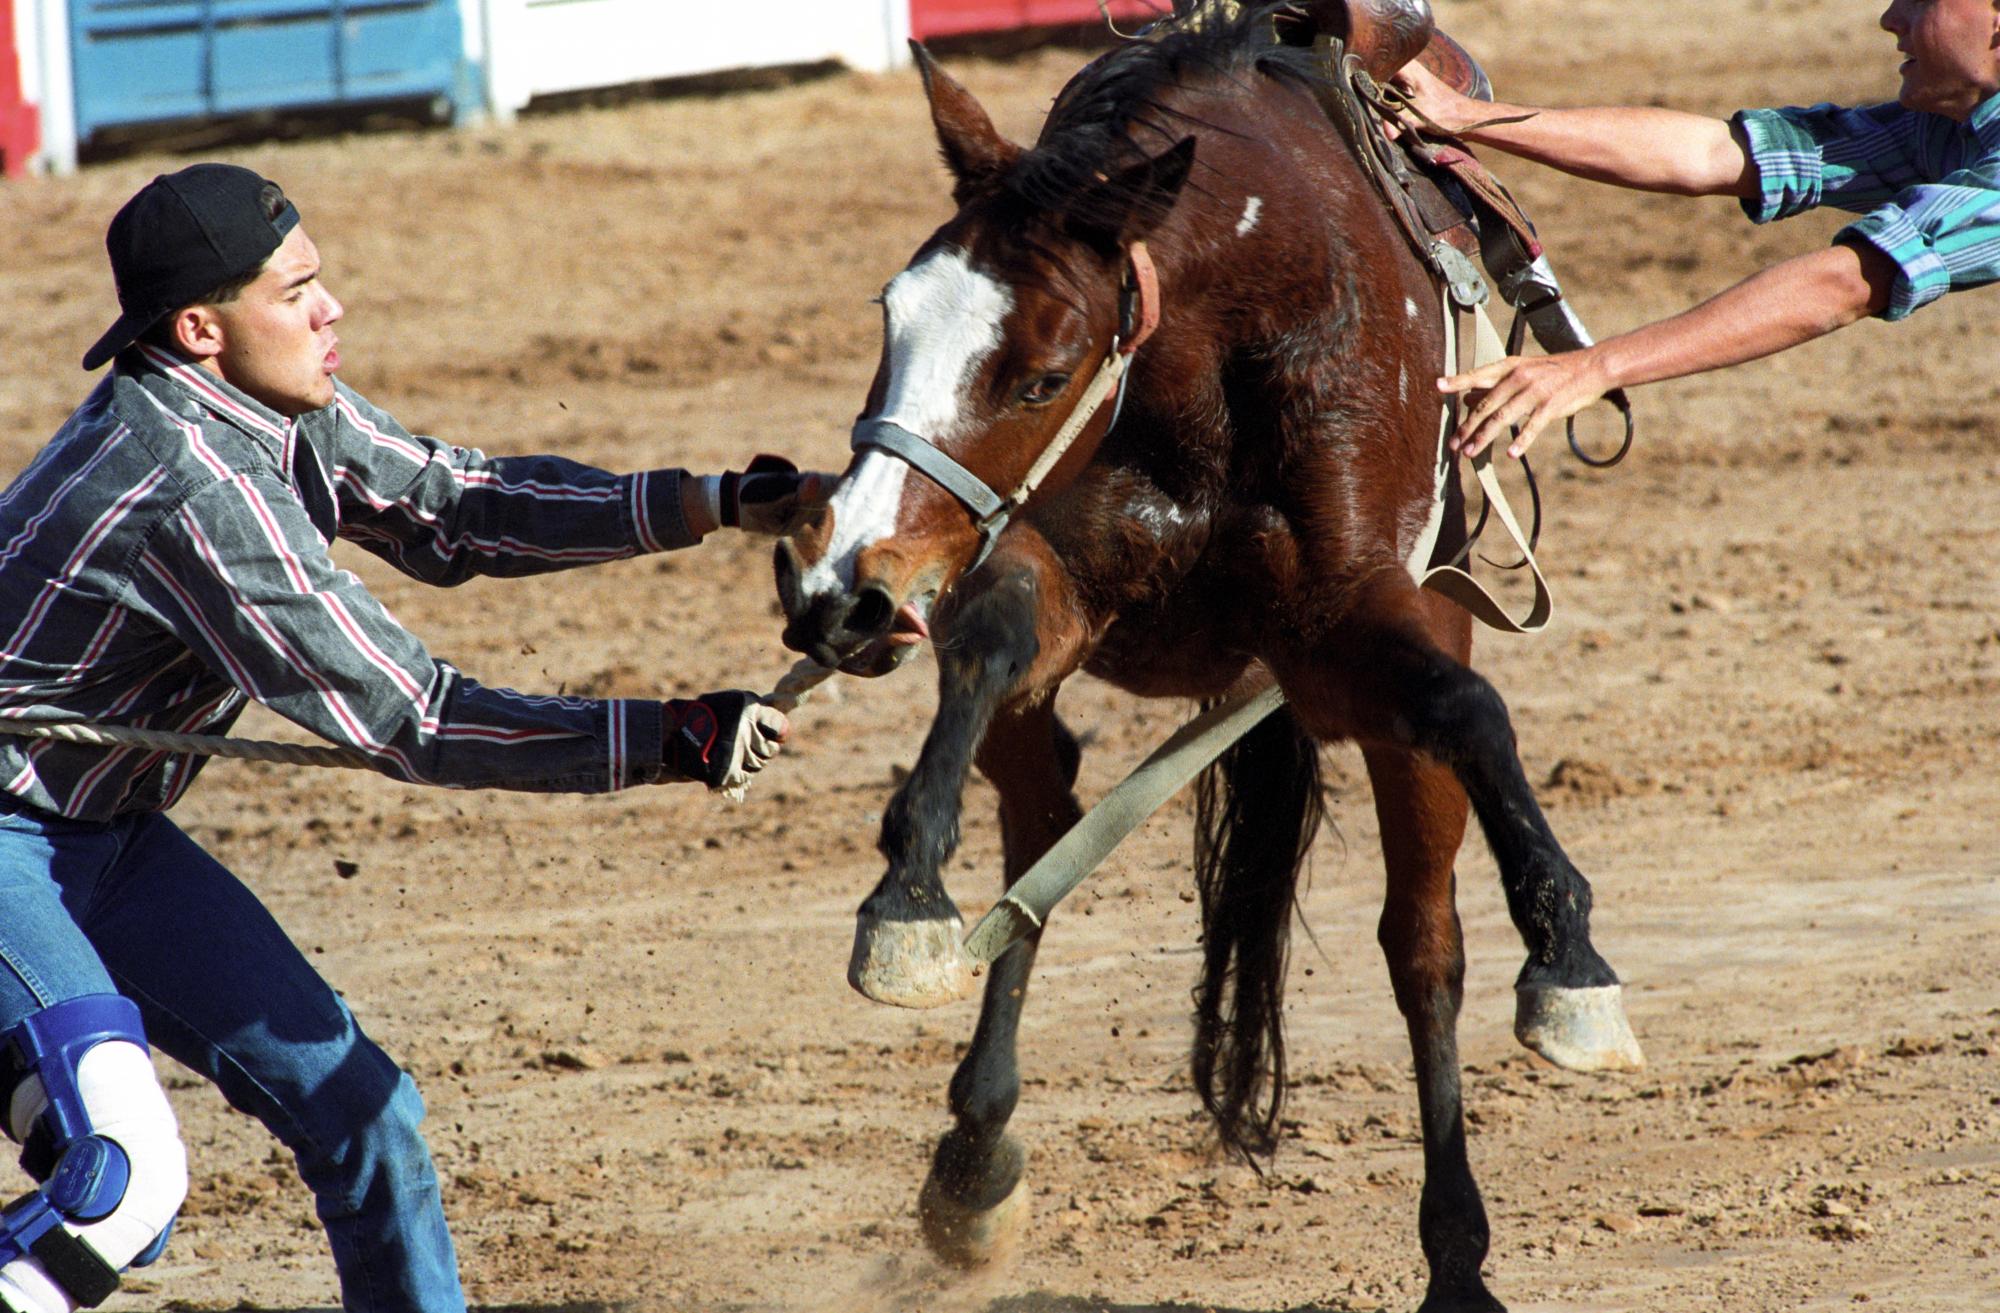 Imperial Valley Rodeo (1992) - Wild Horses #1